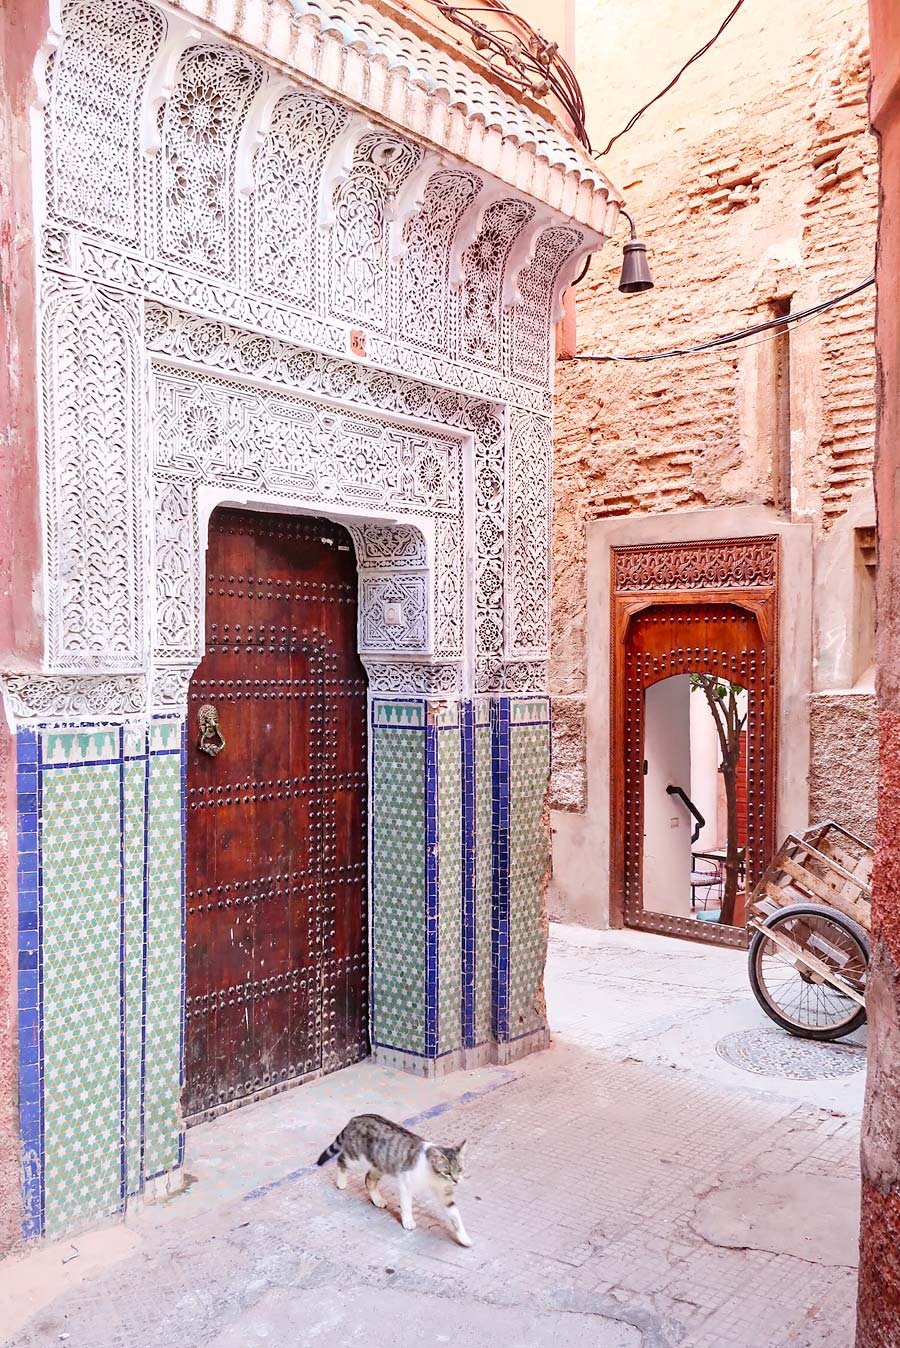 10 Amazing Things to Do in Marrakech